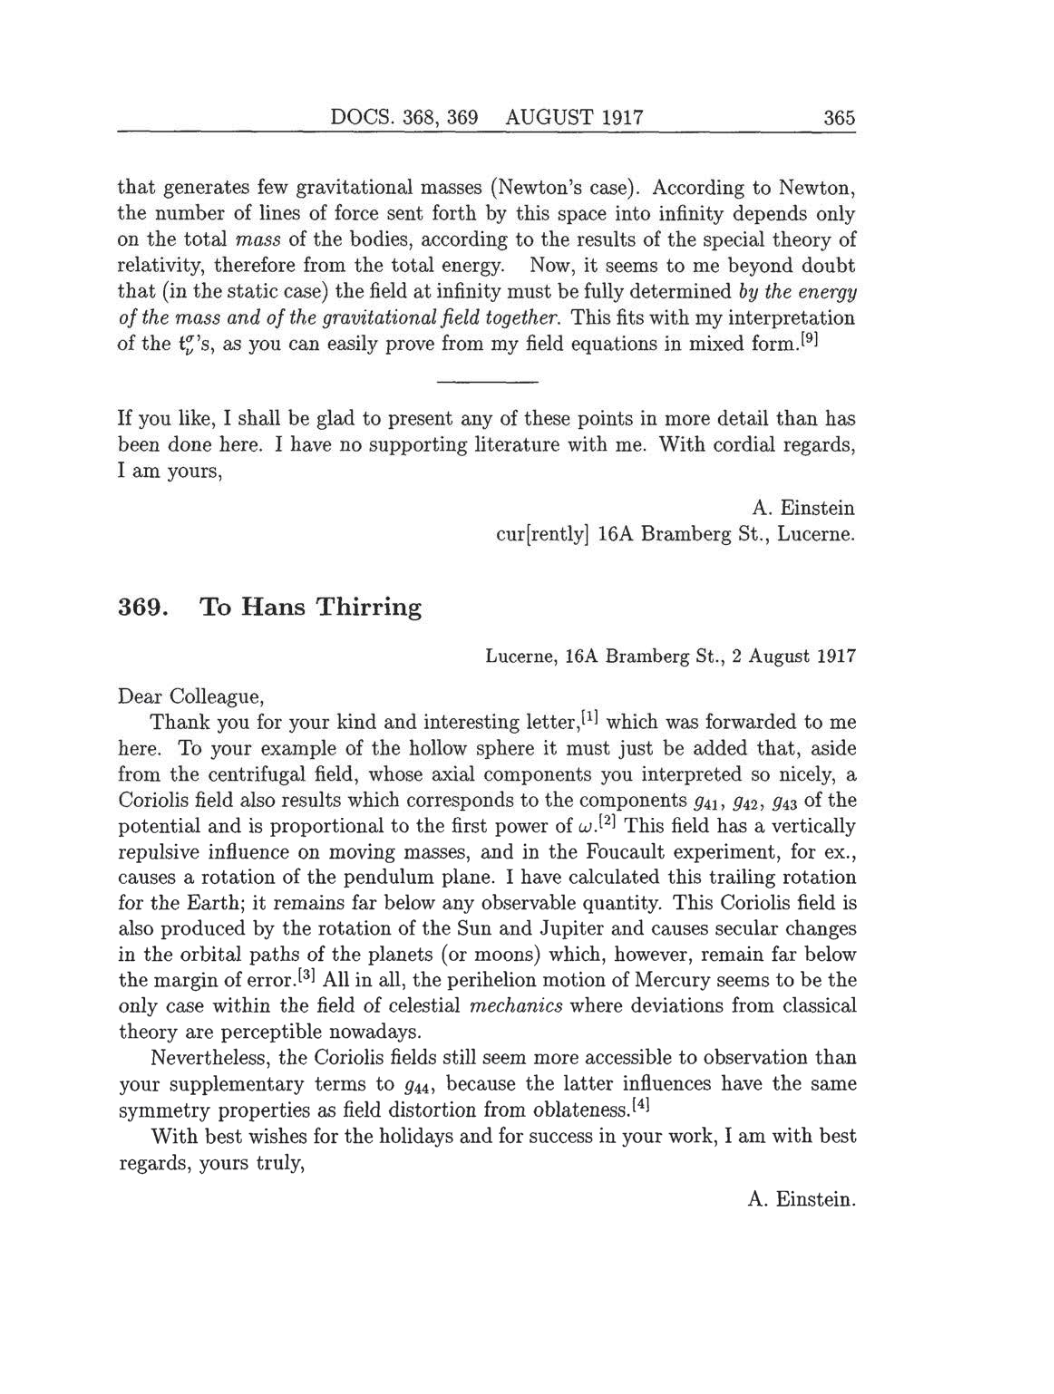 Volume 8: The Berlin Years: Correspondence, 1914-1918 (English translation supplement) page 365